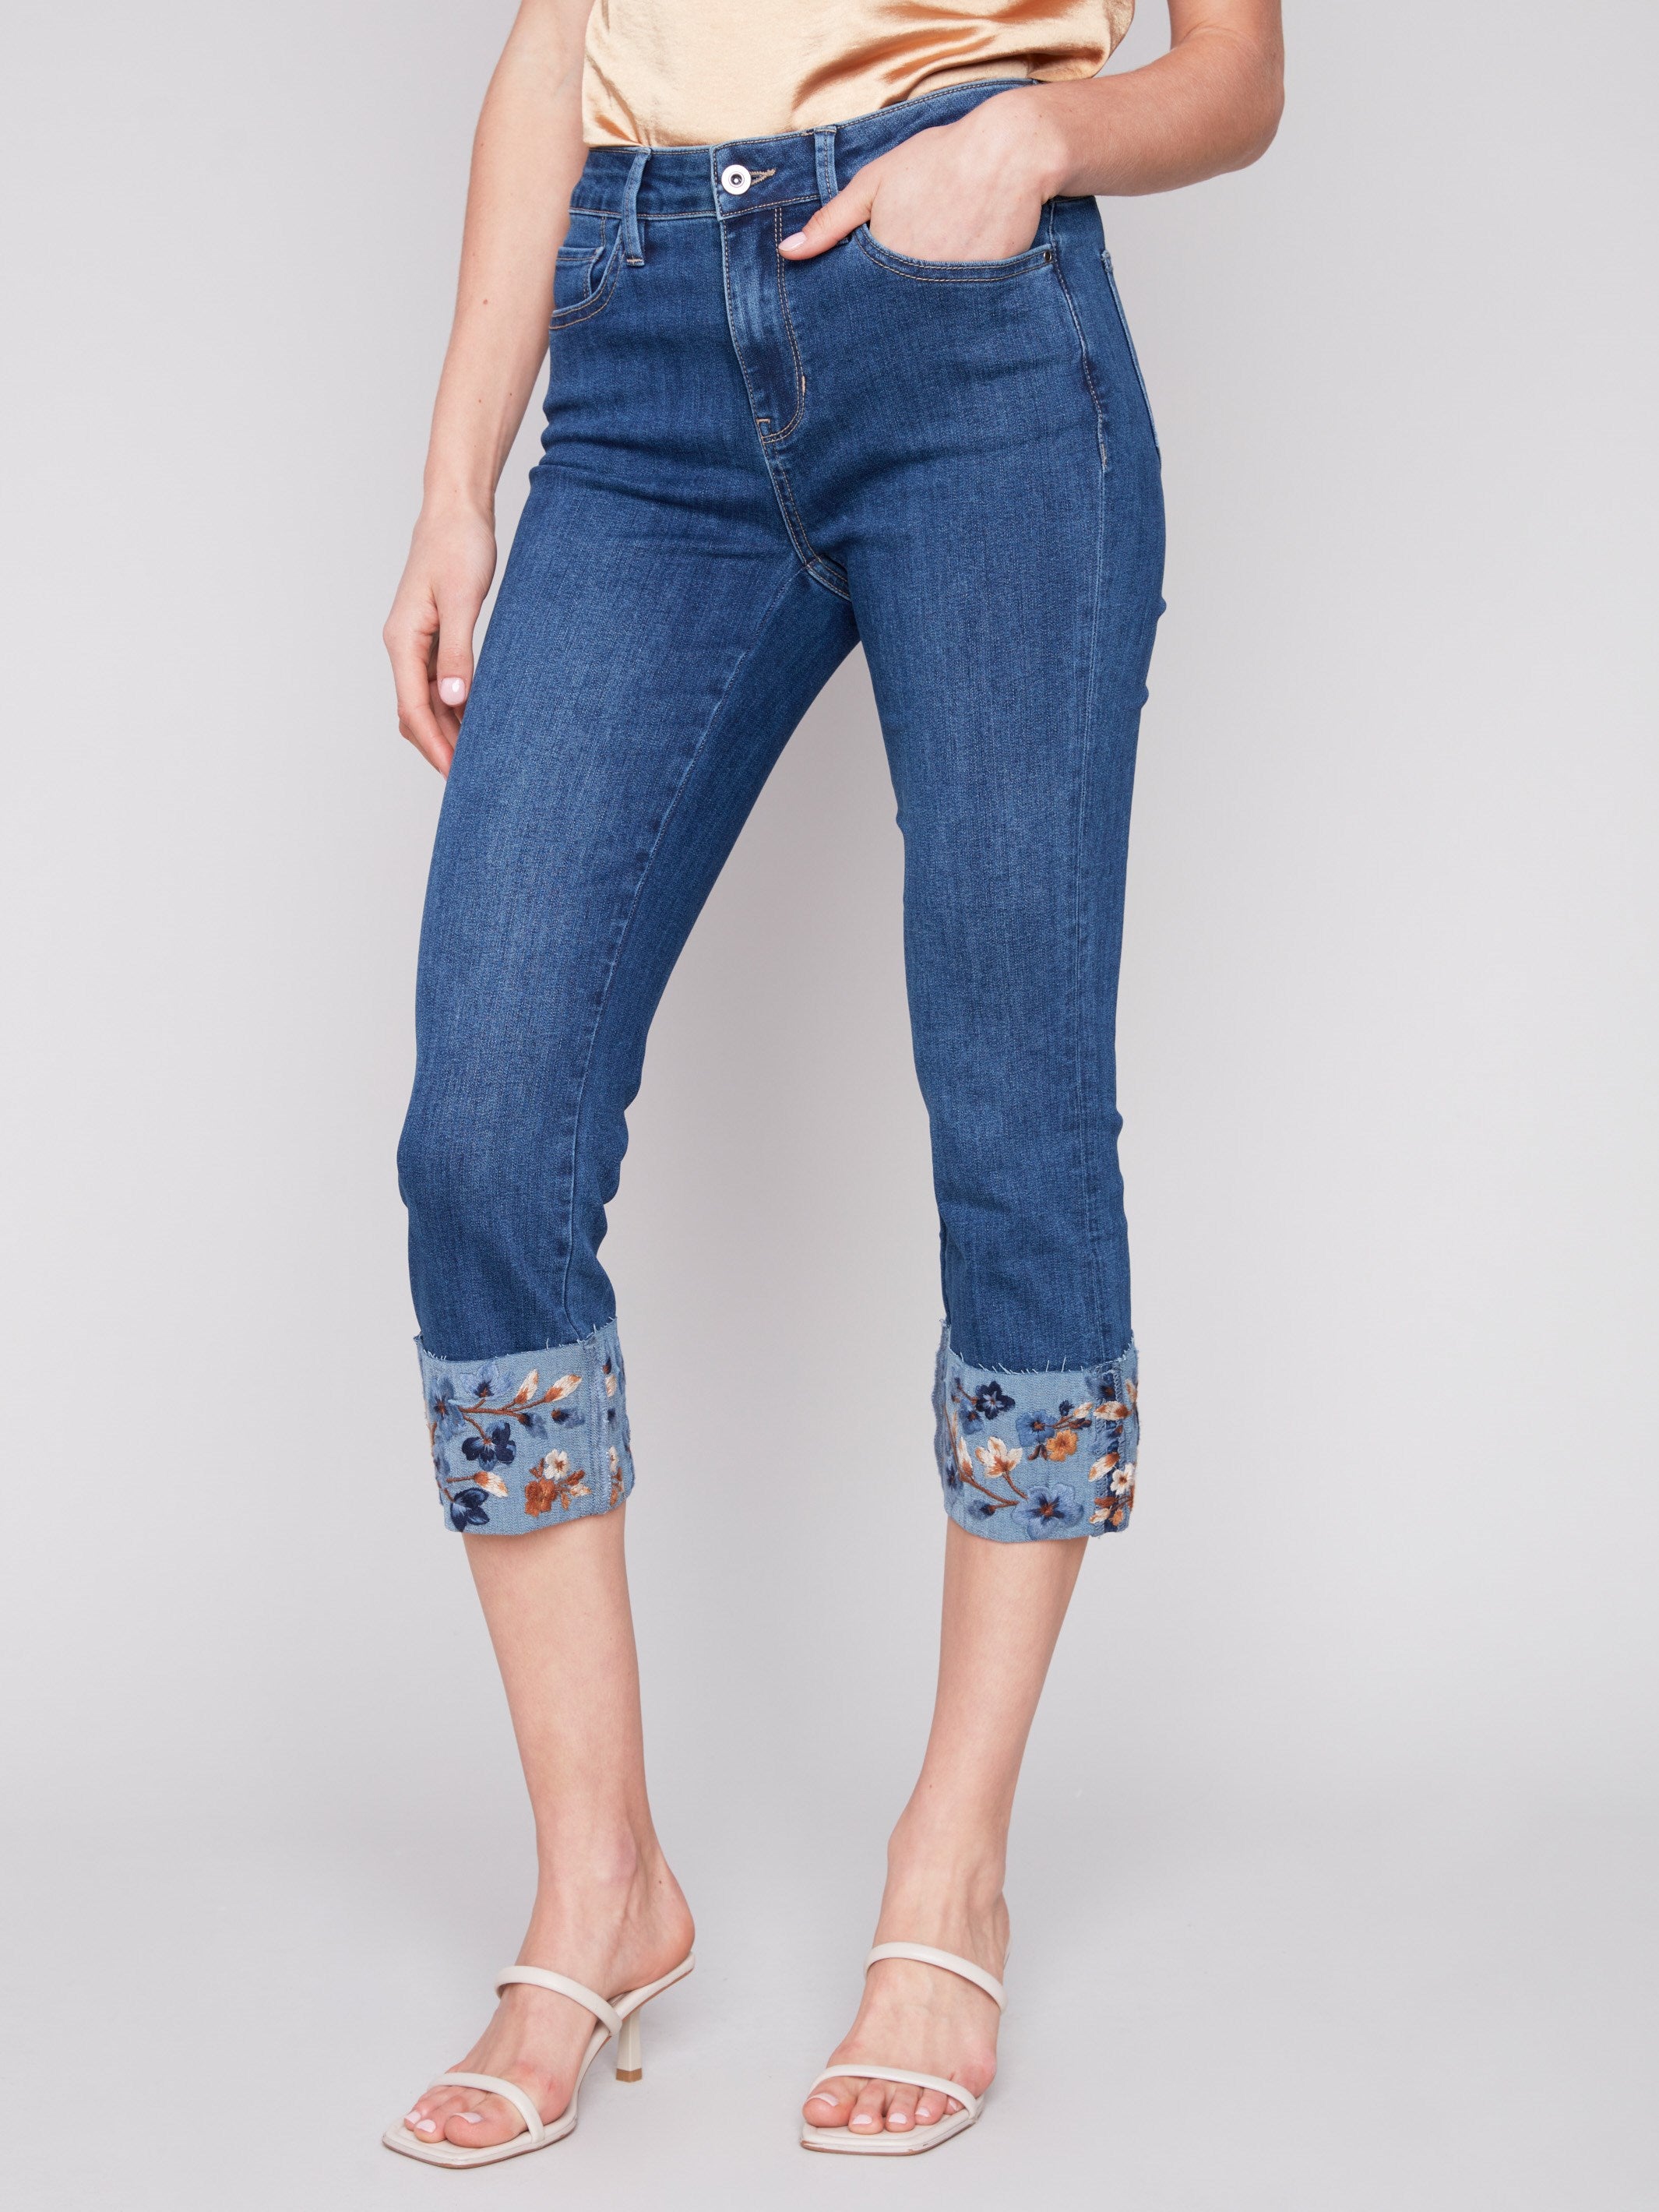 Cropped Jeans with Embroidered Cuff - Indigo - Charlie B Collection Canada - Image 2